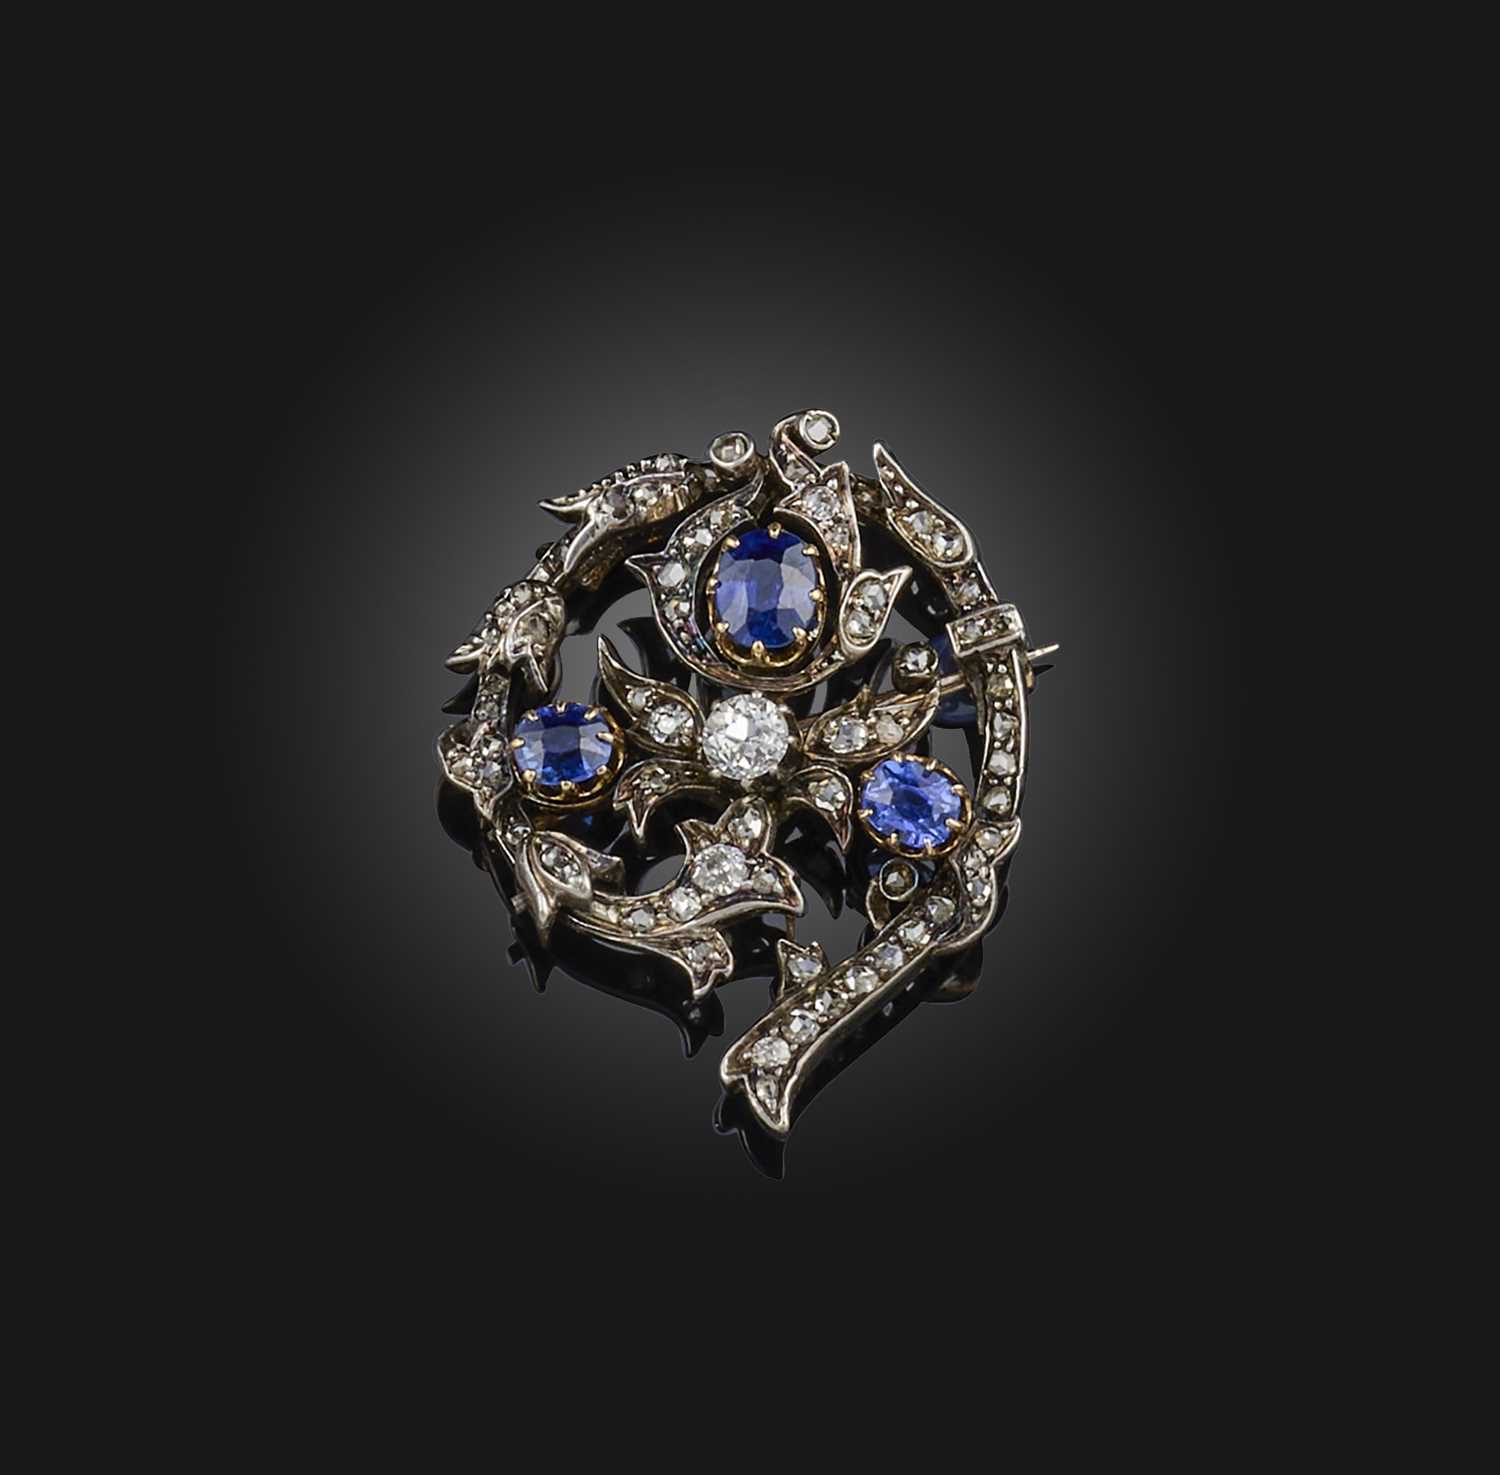 A Victorian sapphire and diamond brooch, late 19th century, designed as a foliate spiral, set with - Image 2 of 3